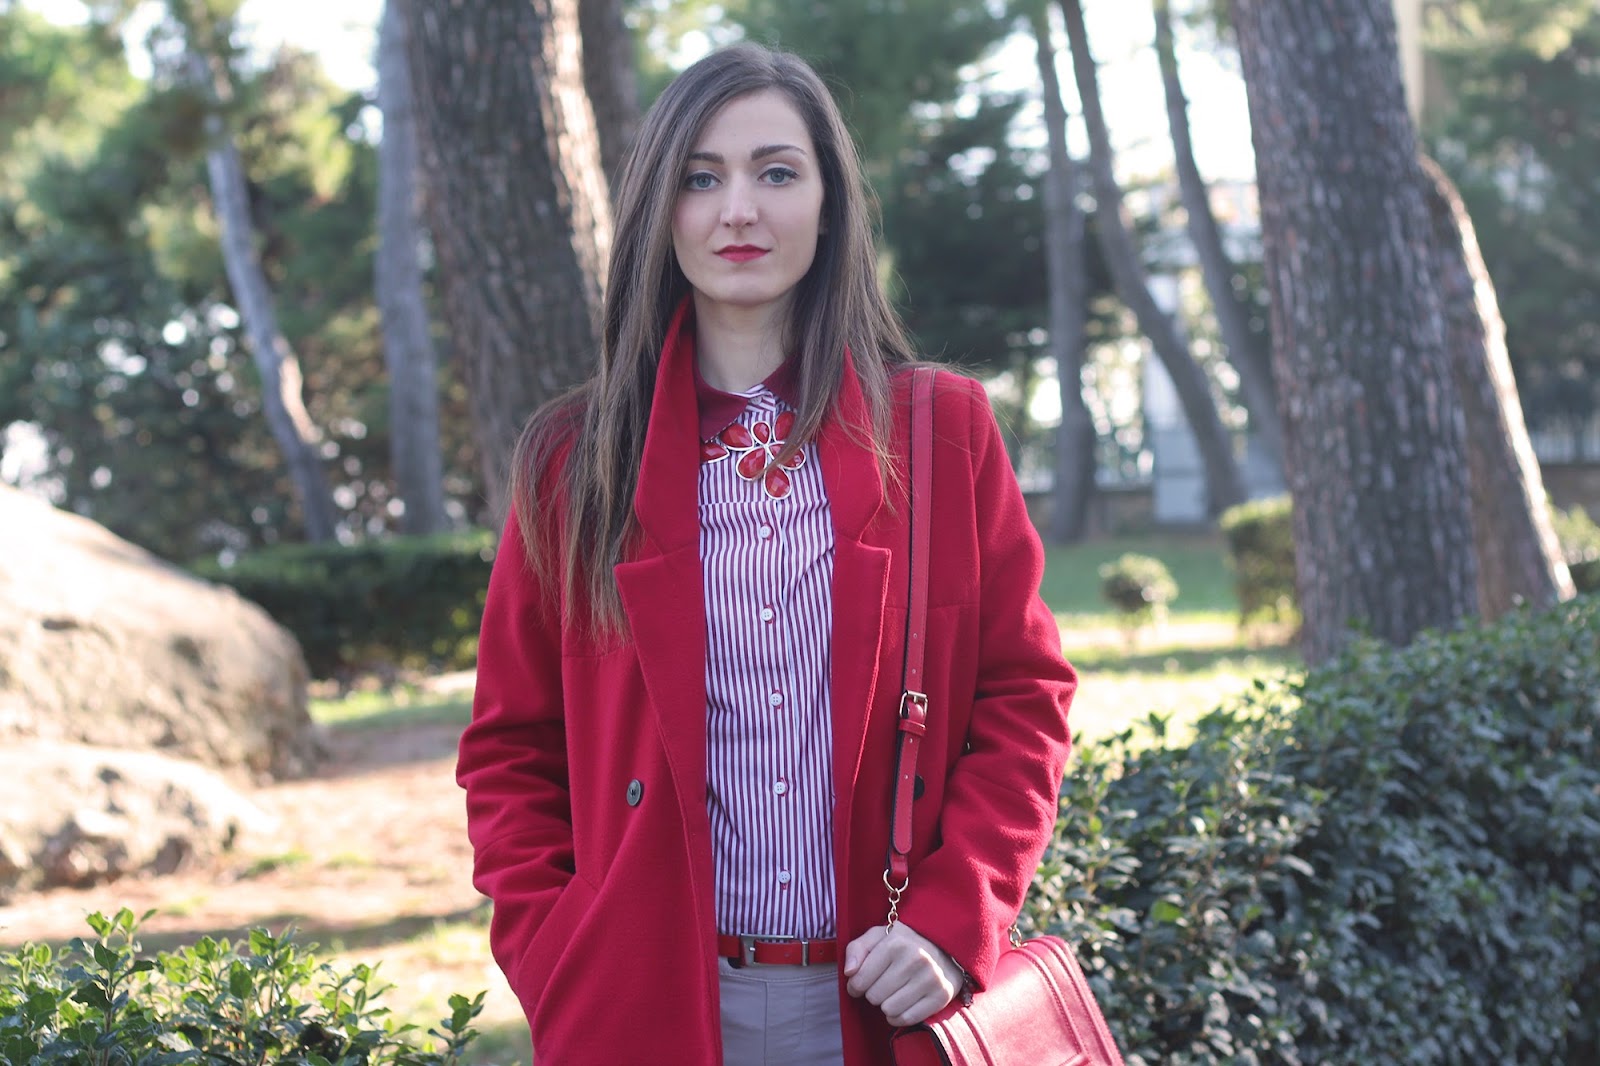 fashion blogger italian italy pescara girl style outfit red coat stripes choices sumissura camicia shirt pumps bow shoes heels janestone necklace jewerly bijoux new book bag